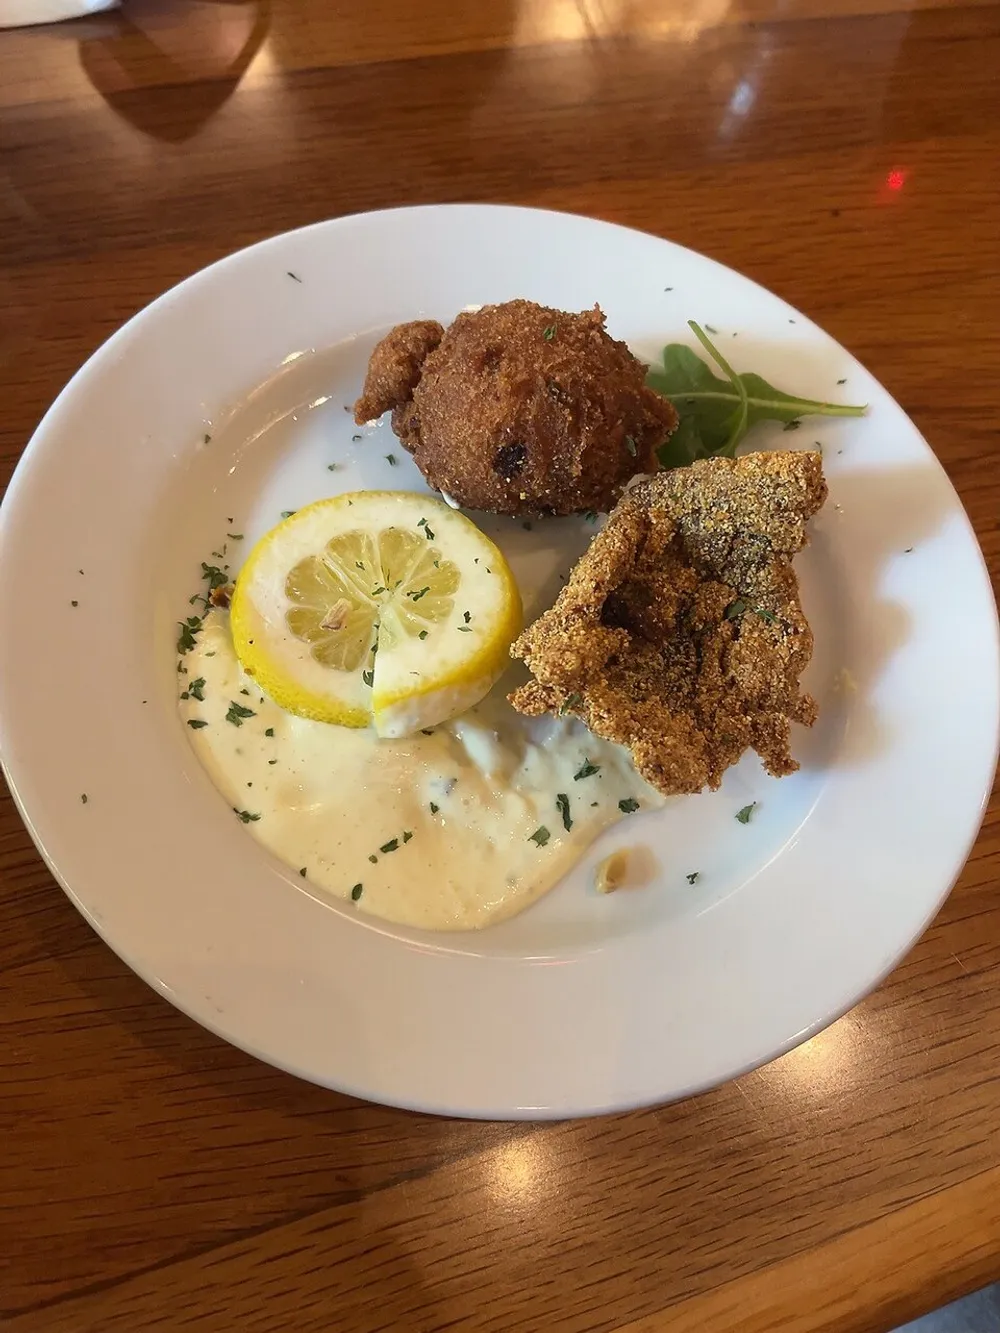 The image shows a plate of food with two pieces of breaded fish a slice of lemon and a dollop of tartar sauce garnished with herbs on a wooden table